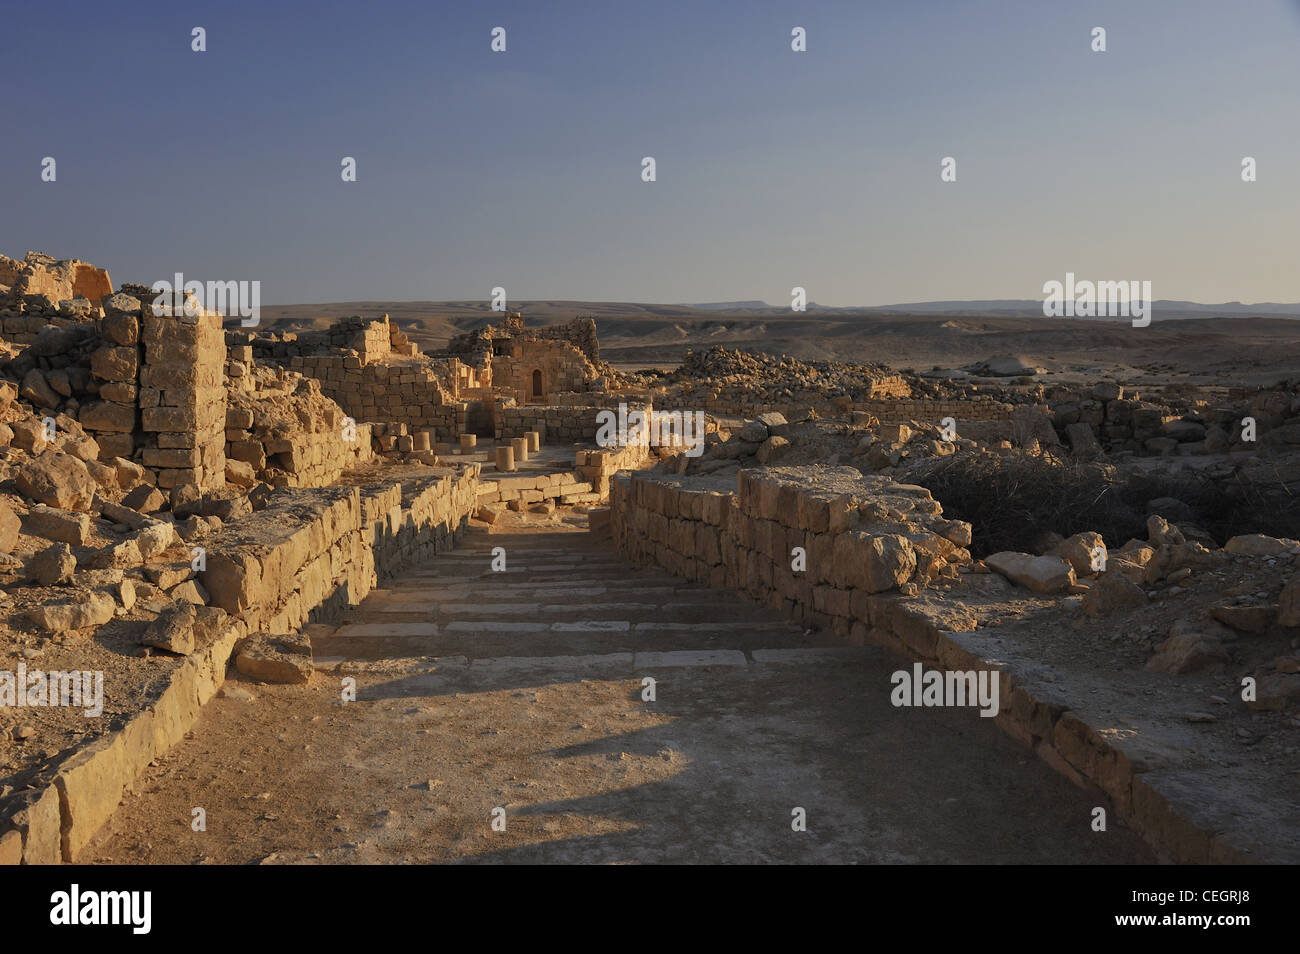 Old street in Shivta Sobota, an archeological site in the Negev Desert of Israel Stock Photo